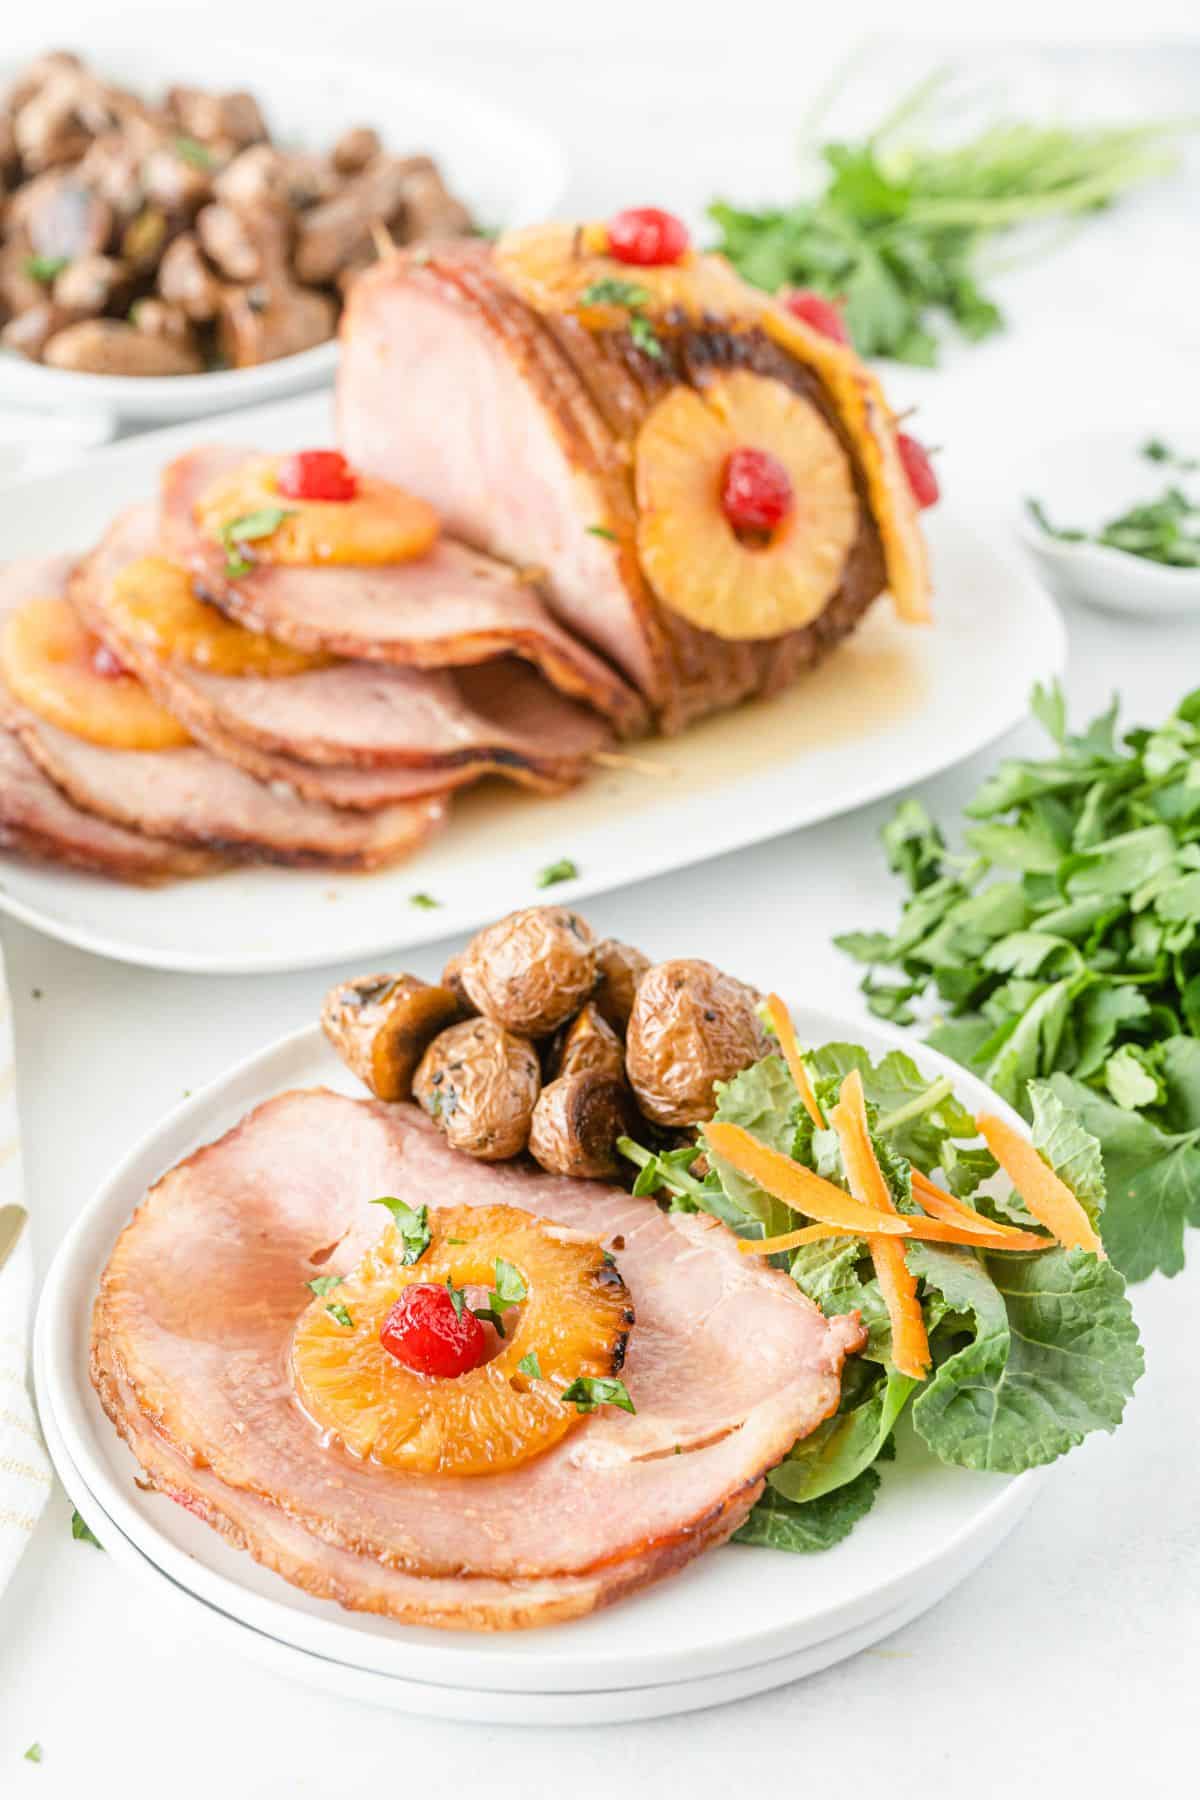 Baked ham with cherries and pineapples on a serving plate, with baby potatoes on the side.